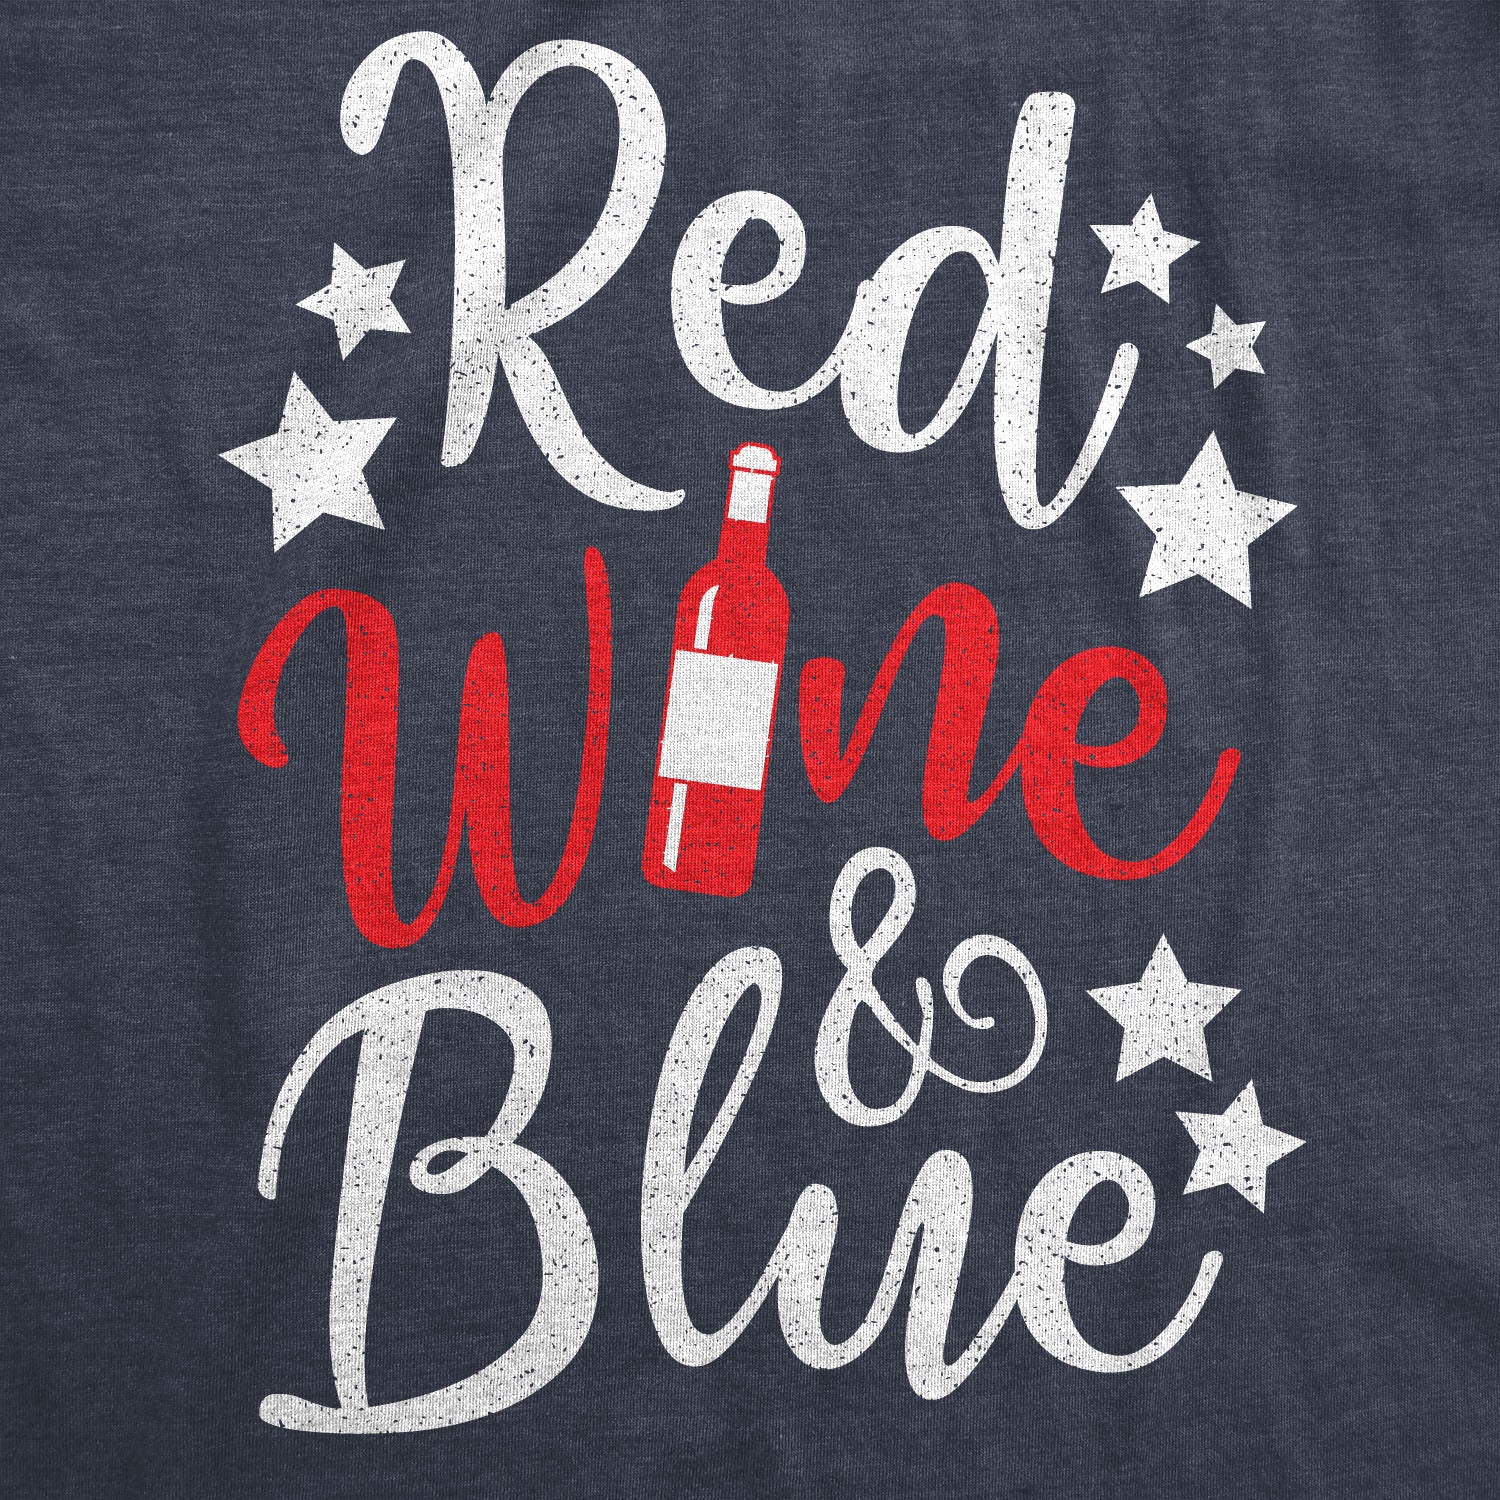 Funny Heather Navy Red Wine And Blue Womens T Shirt Nerdy Fourth of July Political Tee